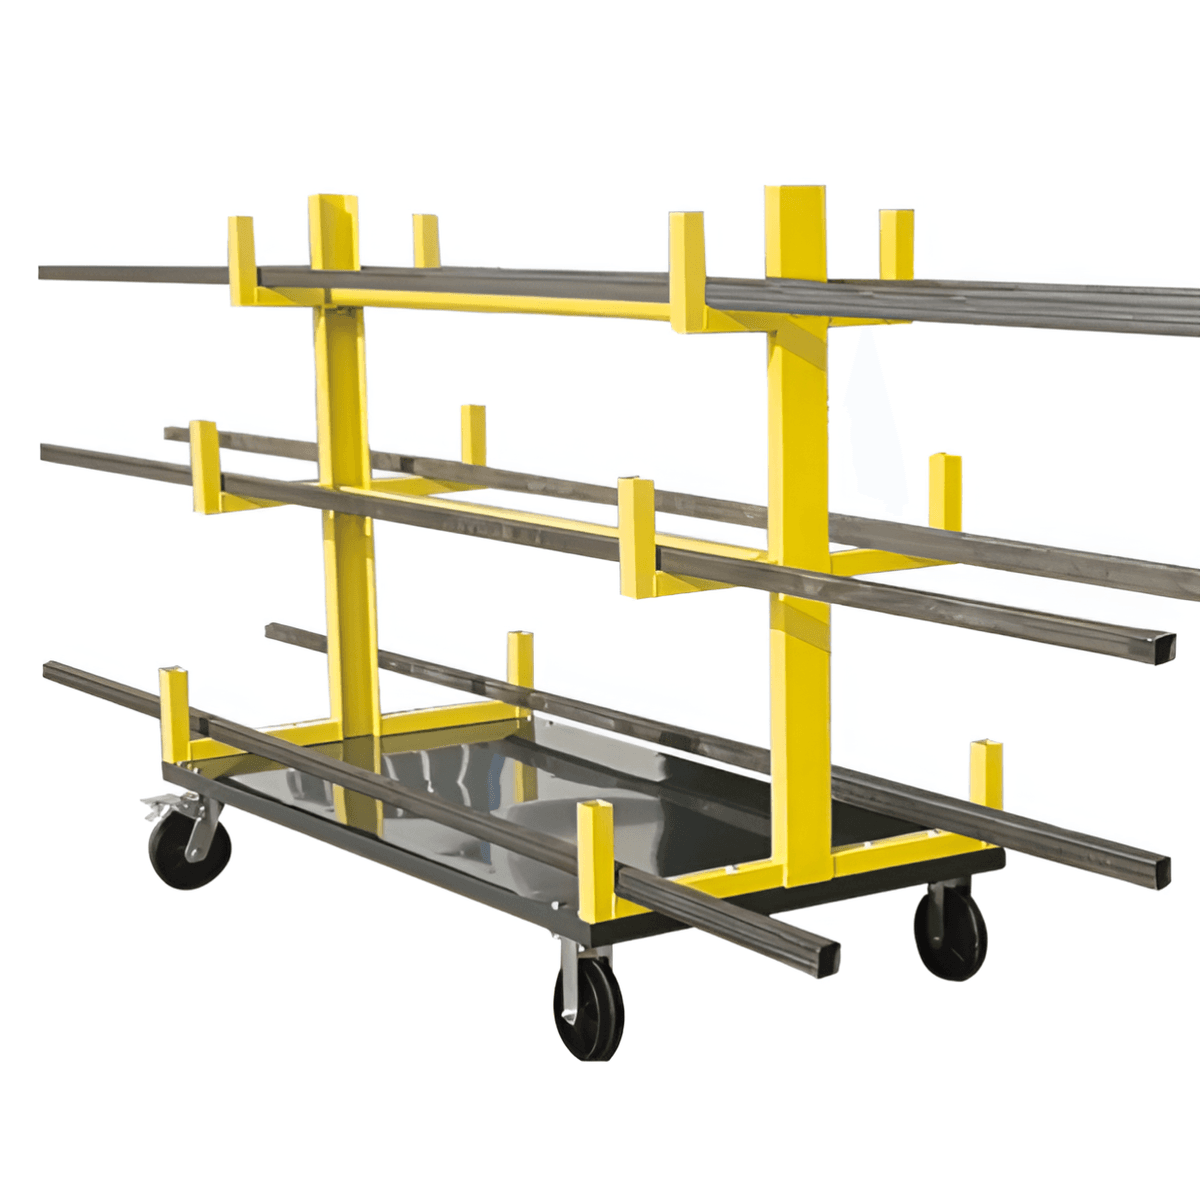 Value Industrial Heavy-Duty Bar And Pipe Cradle Truck - 48" length -2200lbs capacity